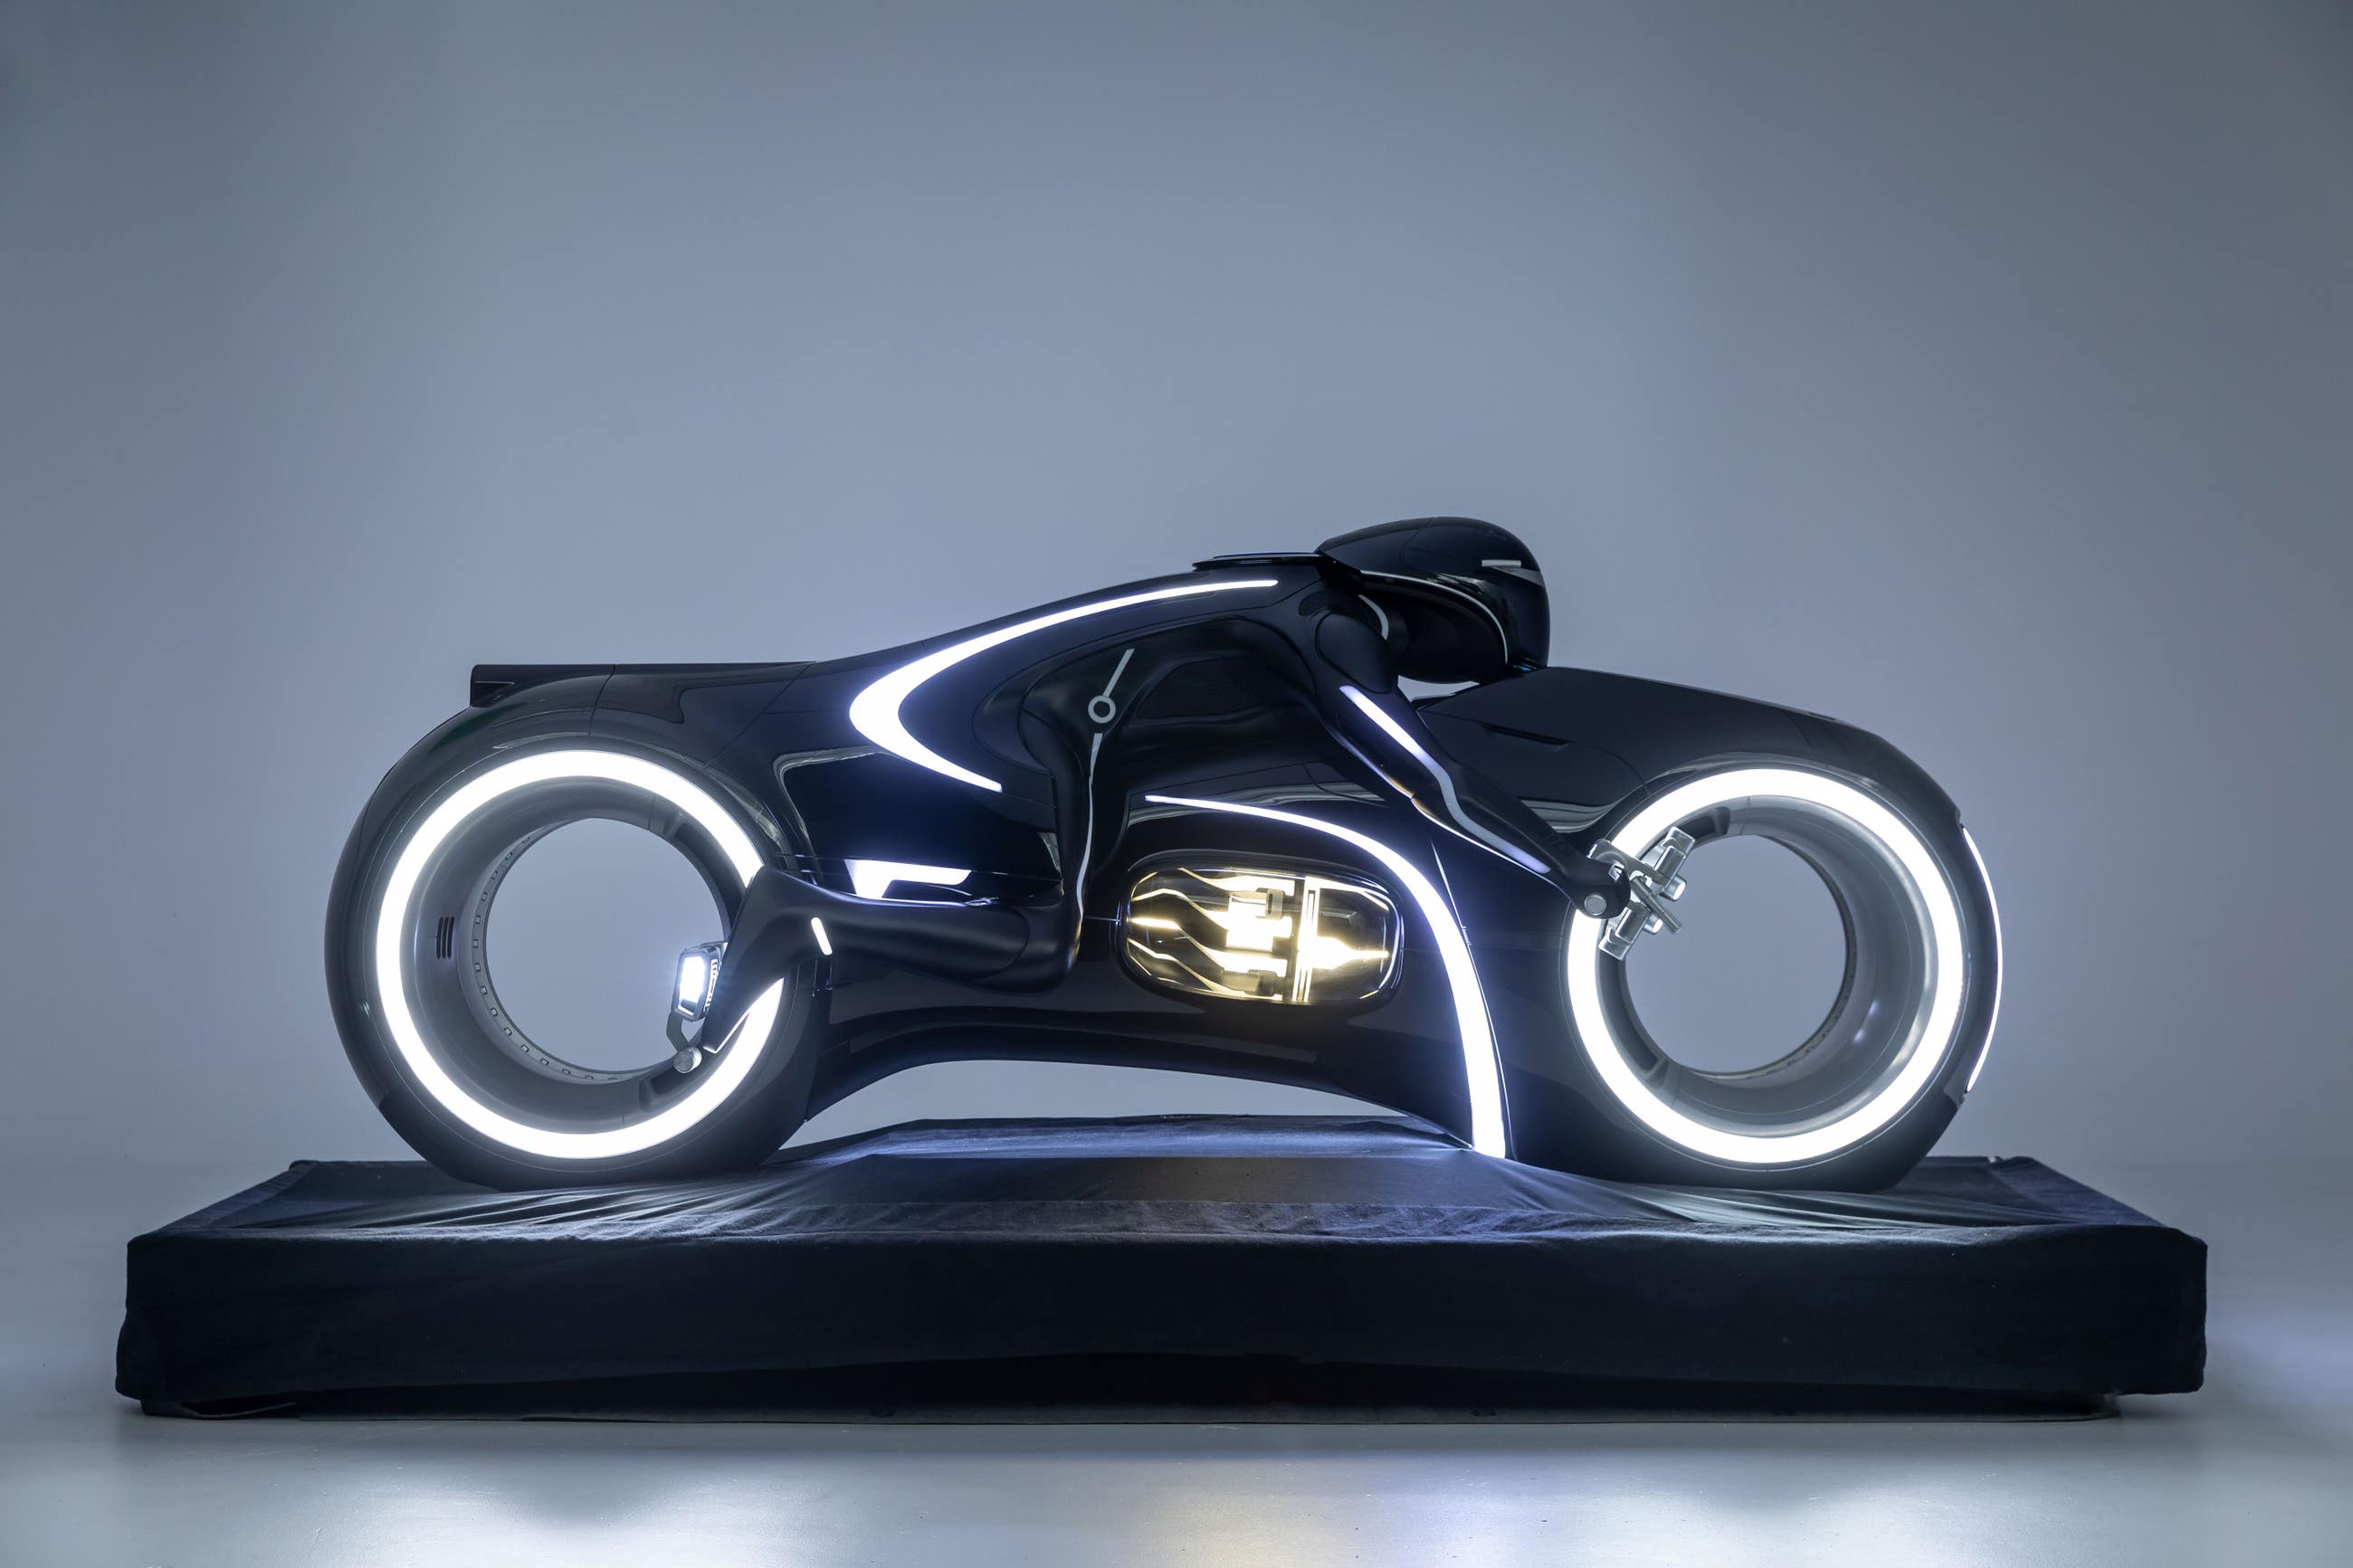 Light Cycle from Tron: Legacy (2010) | Photo: Petersen Automotive Museum